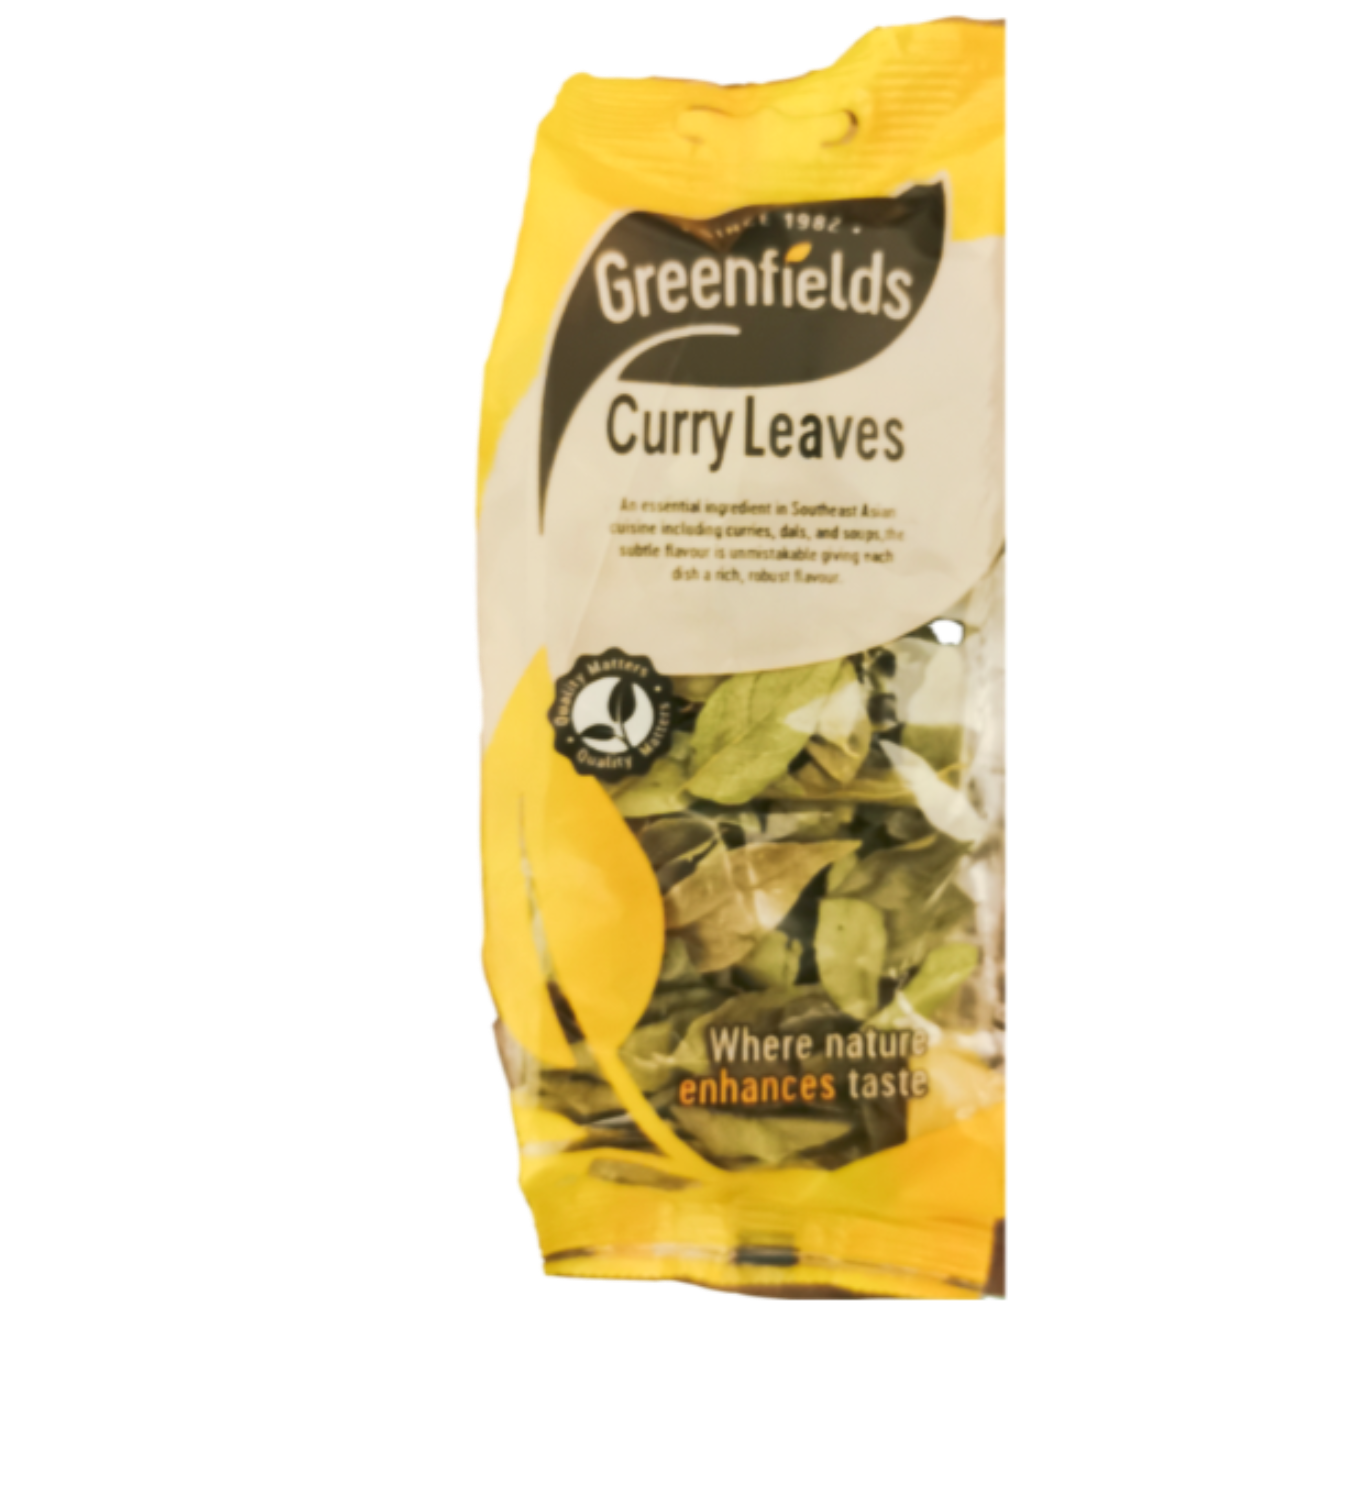 Greenfields Curry Leaves